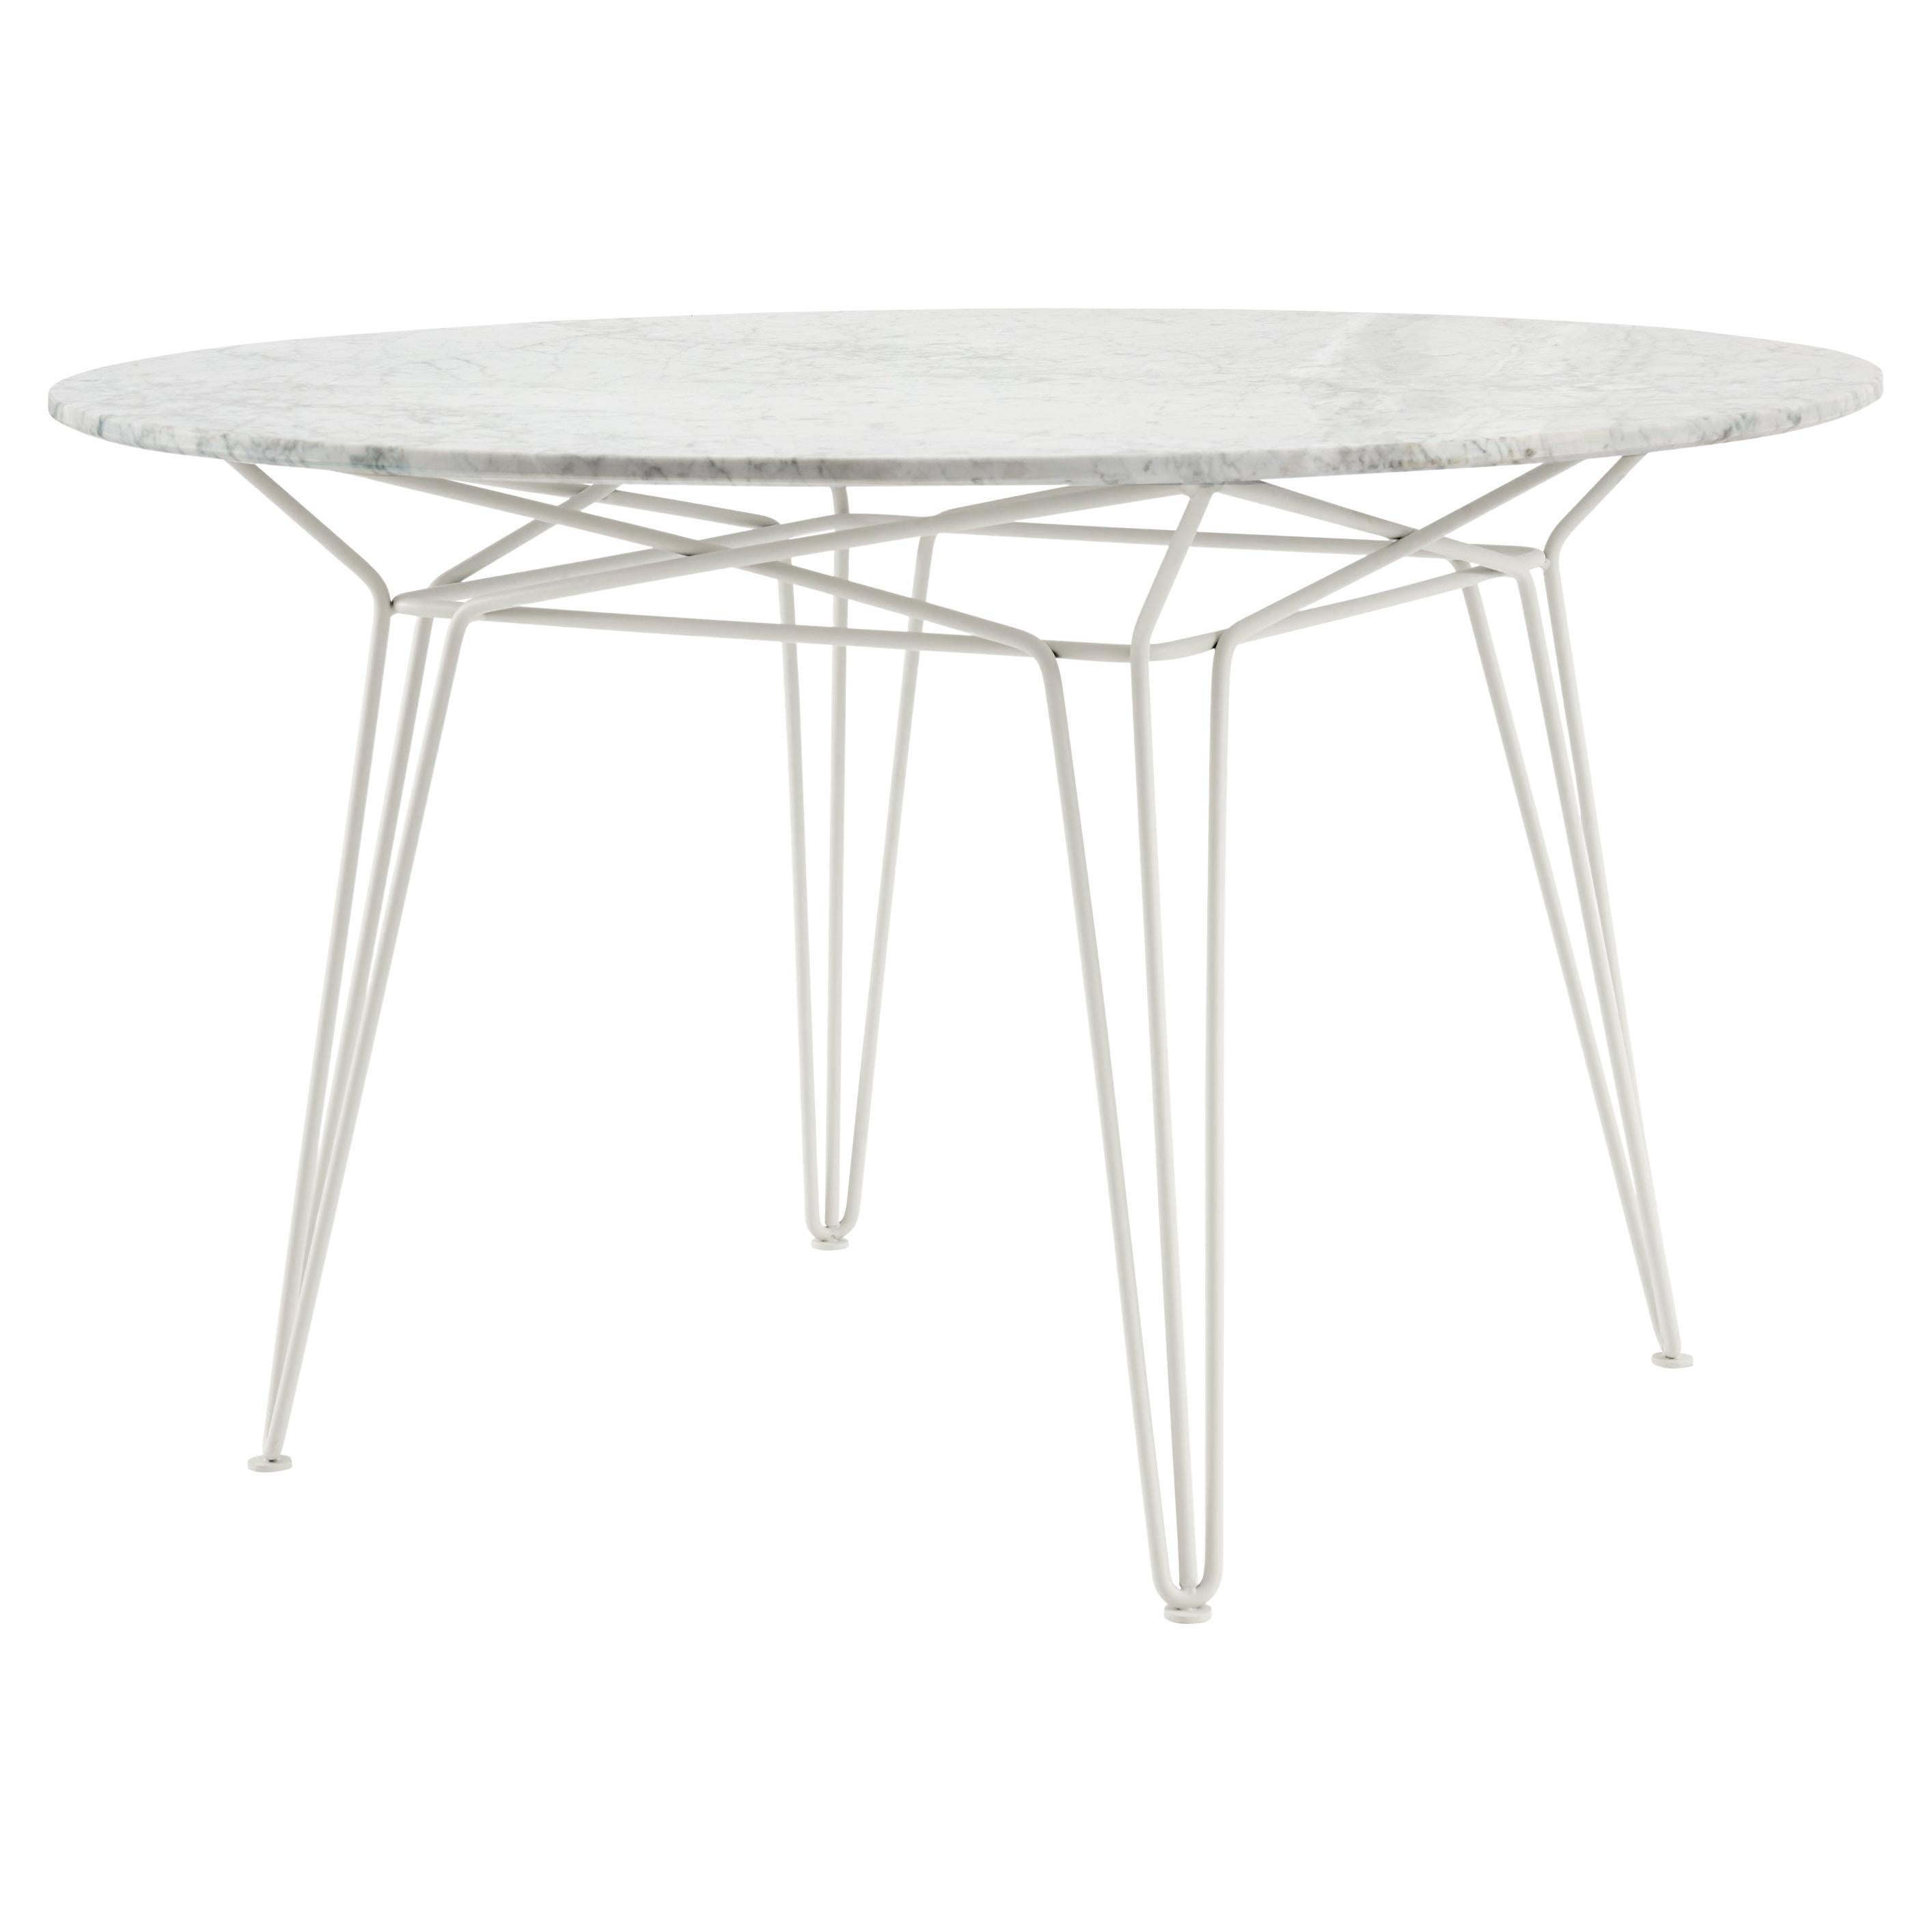 SP01 Parisi Table in White Carrara Marble, Made in Italy